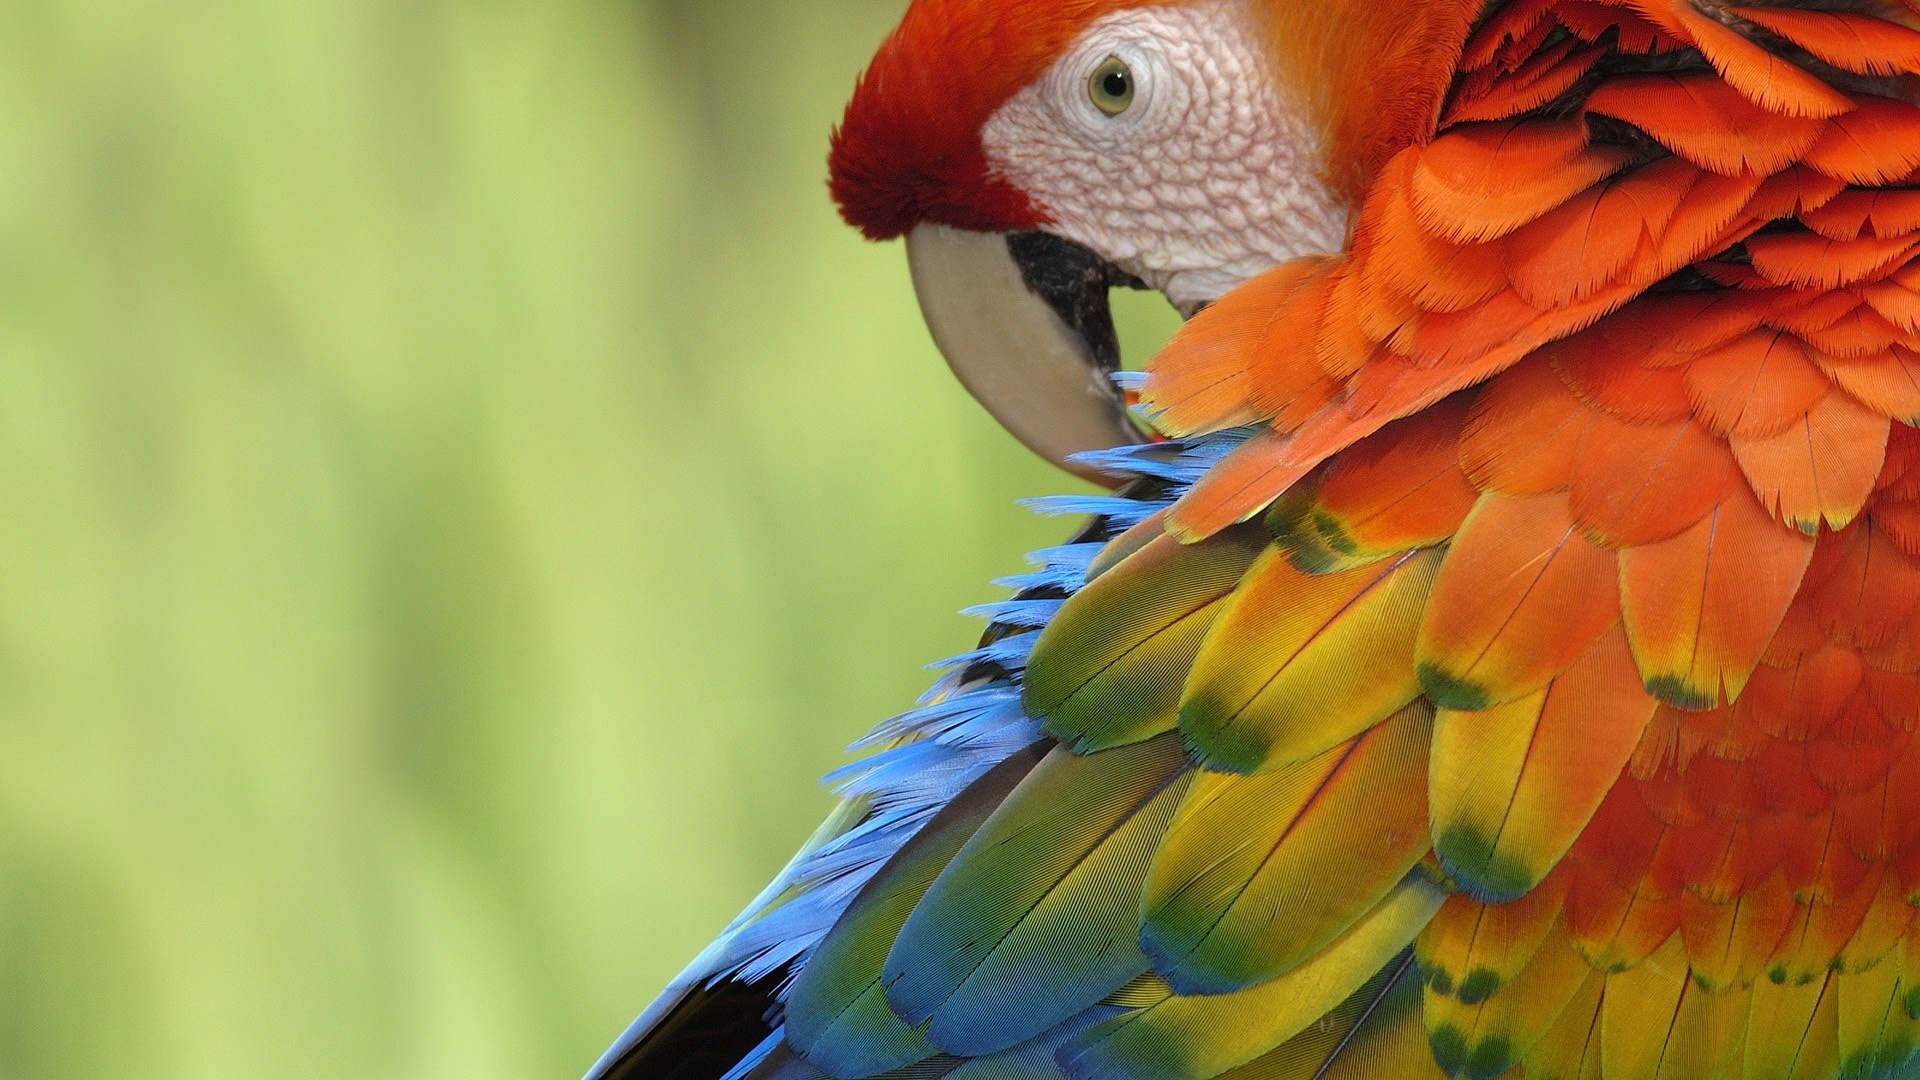 Parrots Wallpapers HDQ Parrots Wallpapers for Free Backgrounds